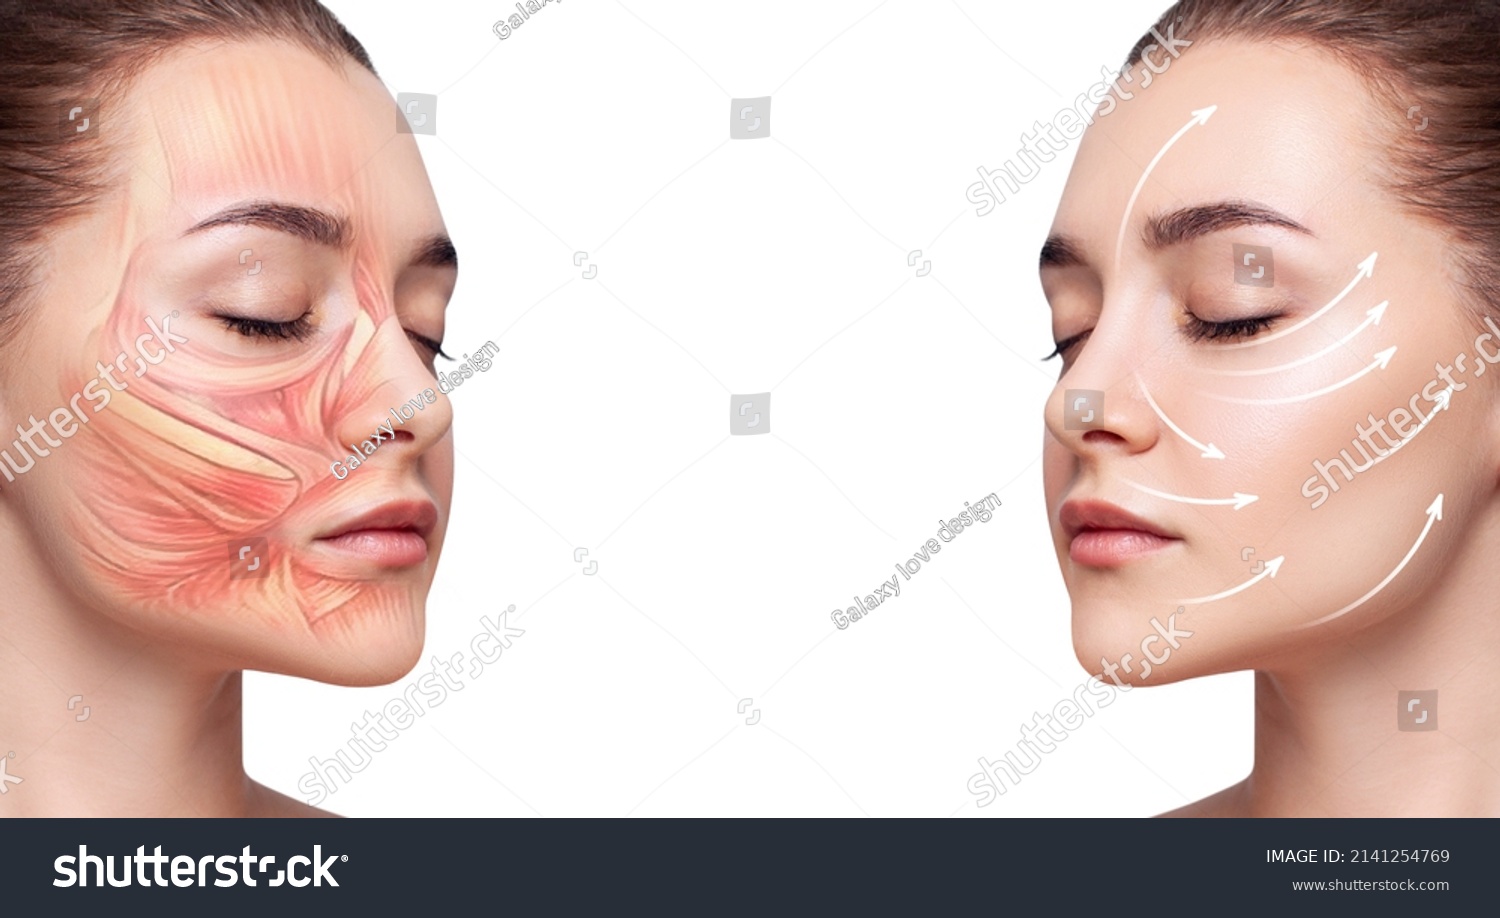 Young woman with half of face with muscles structure under skin. #2141254769